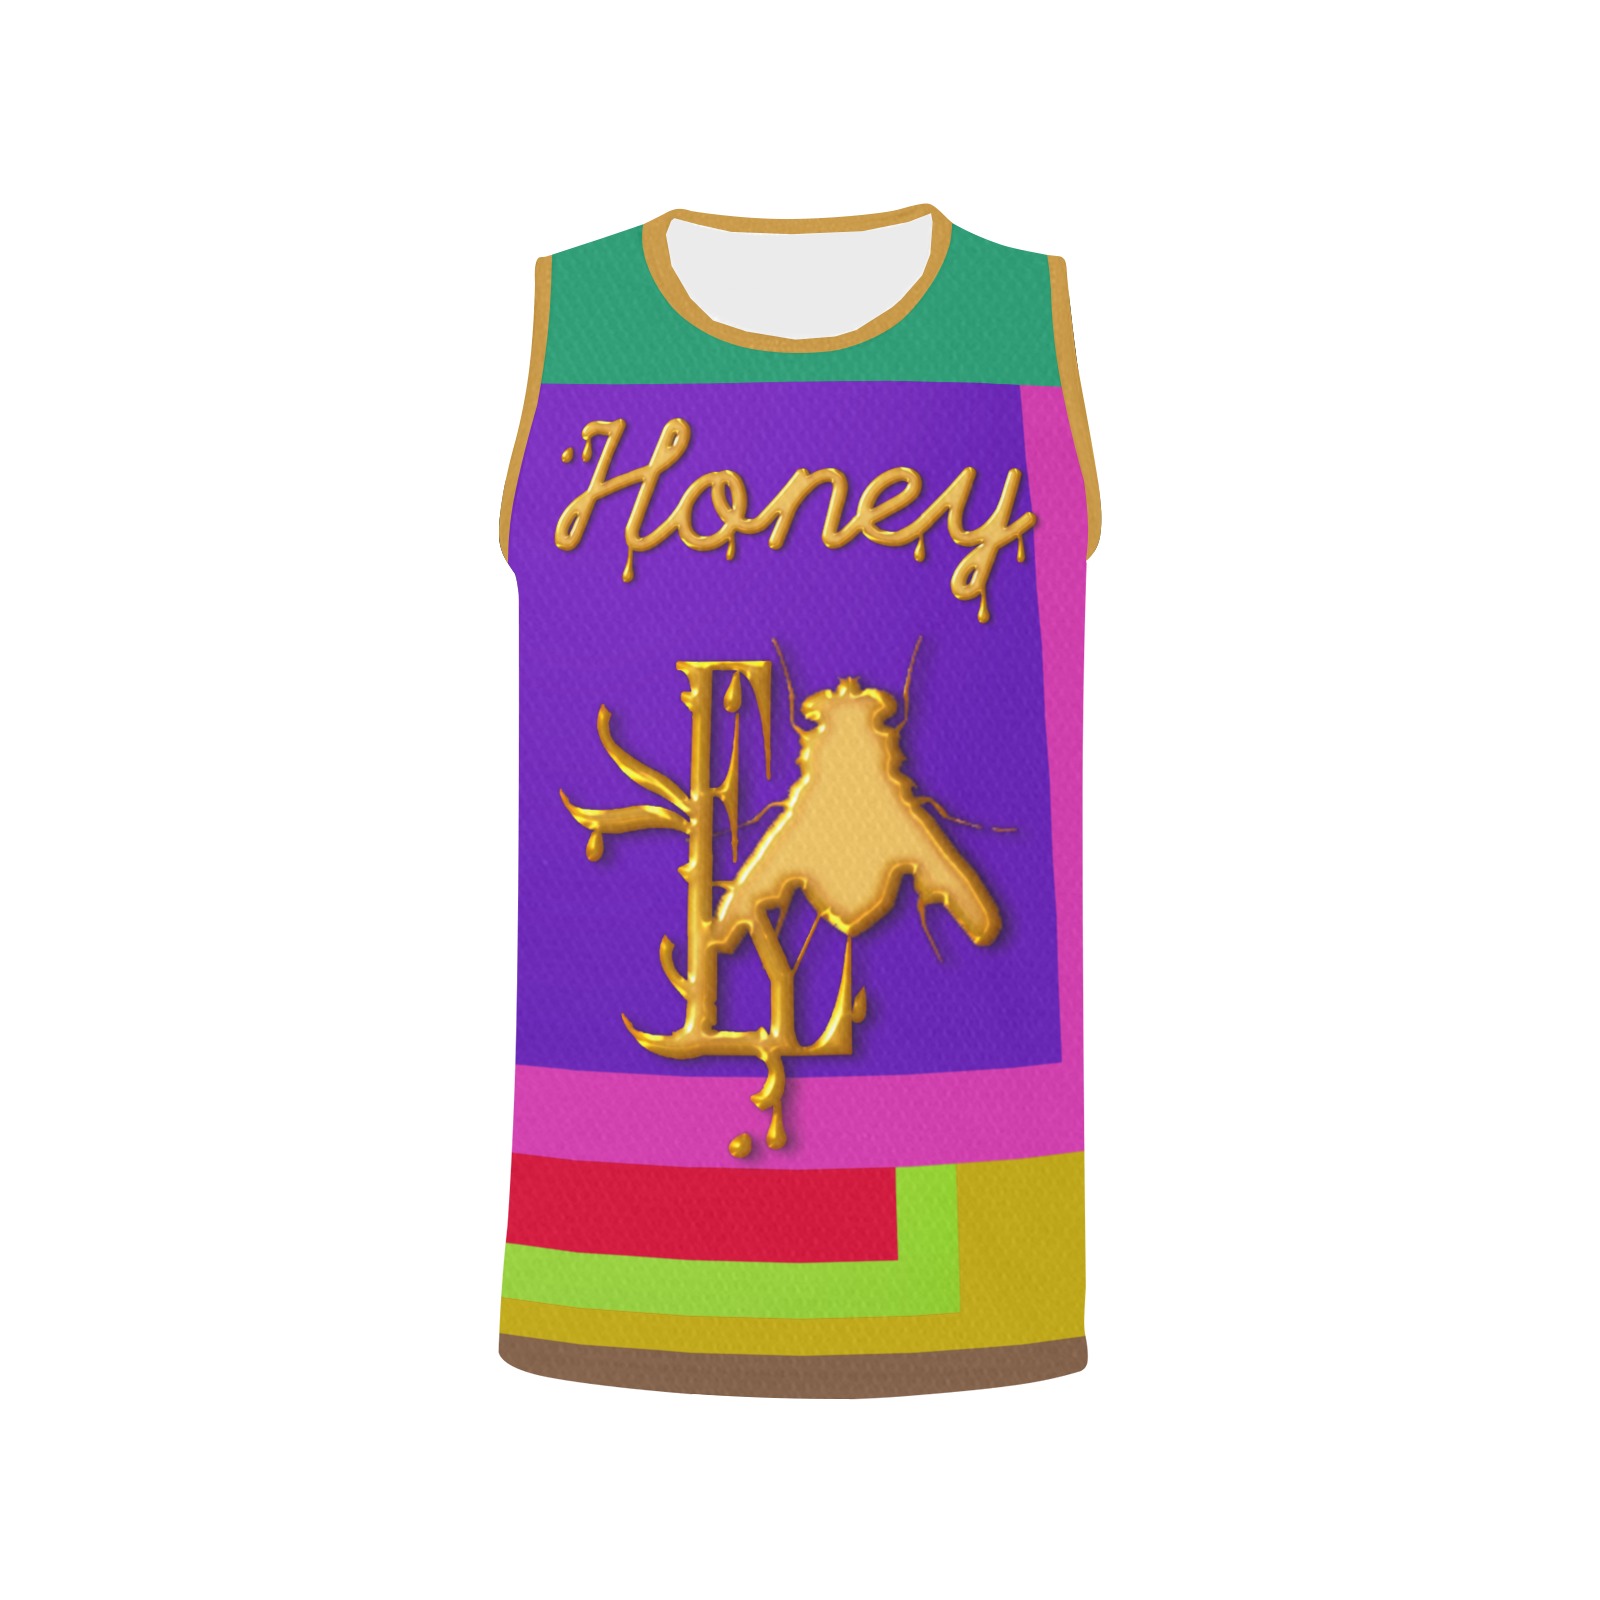 Honey Collectable Fly All Over Print Basketball Jersey